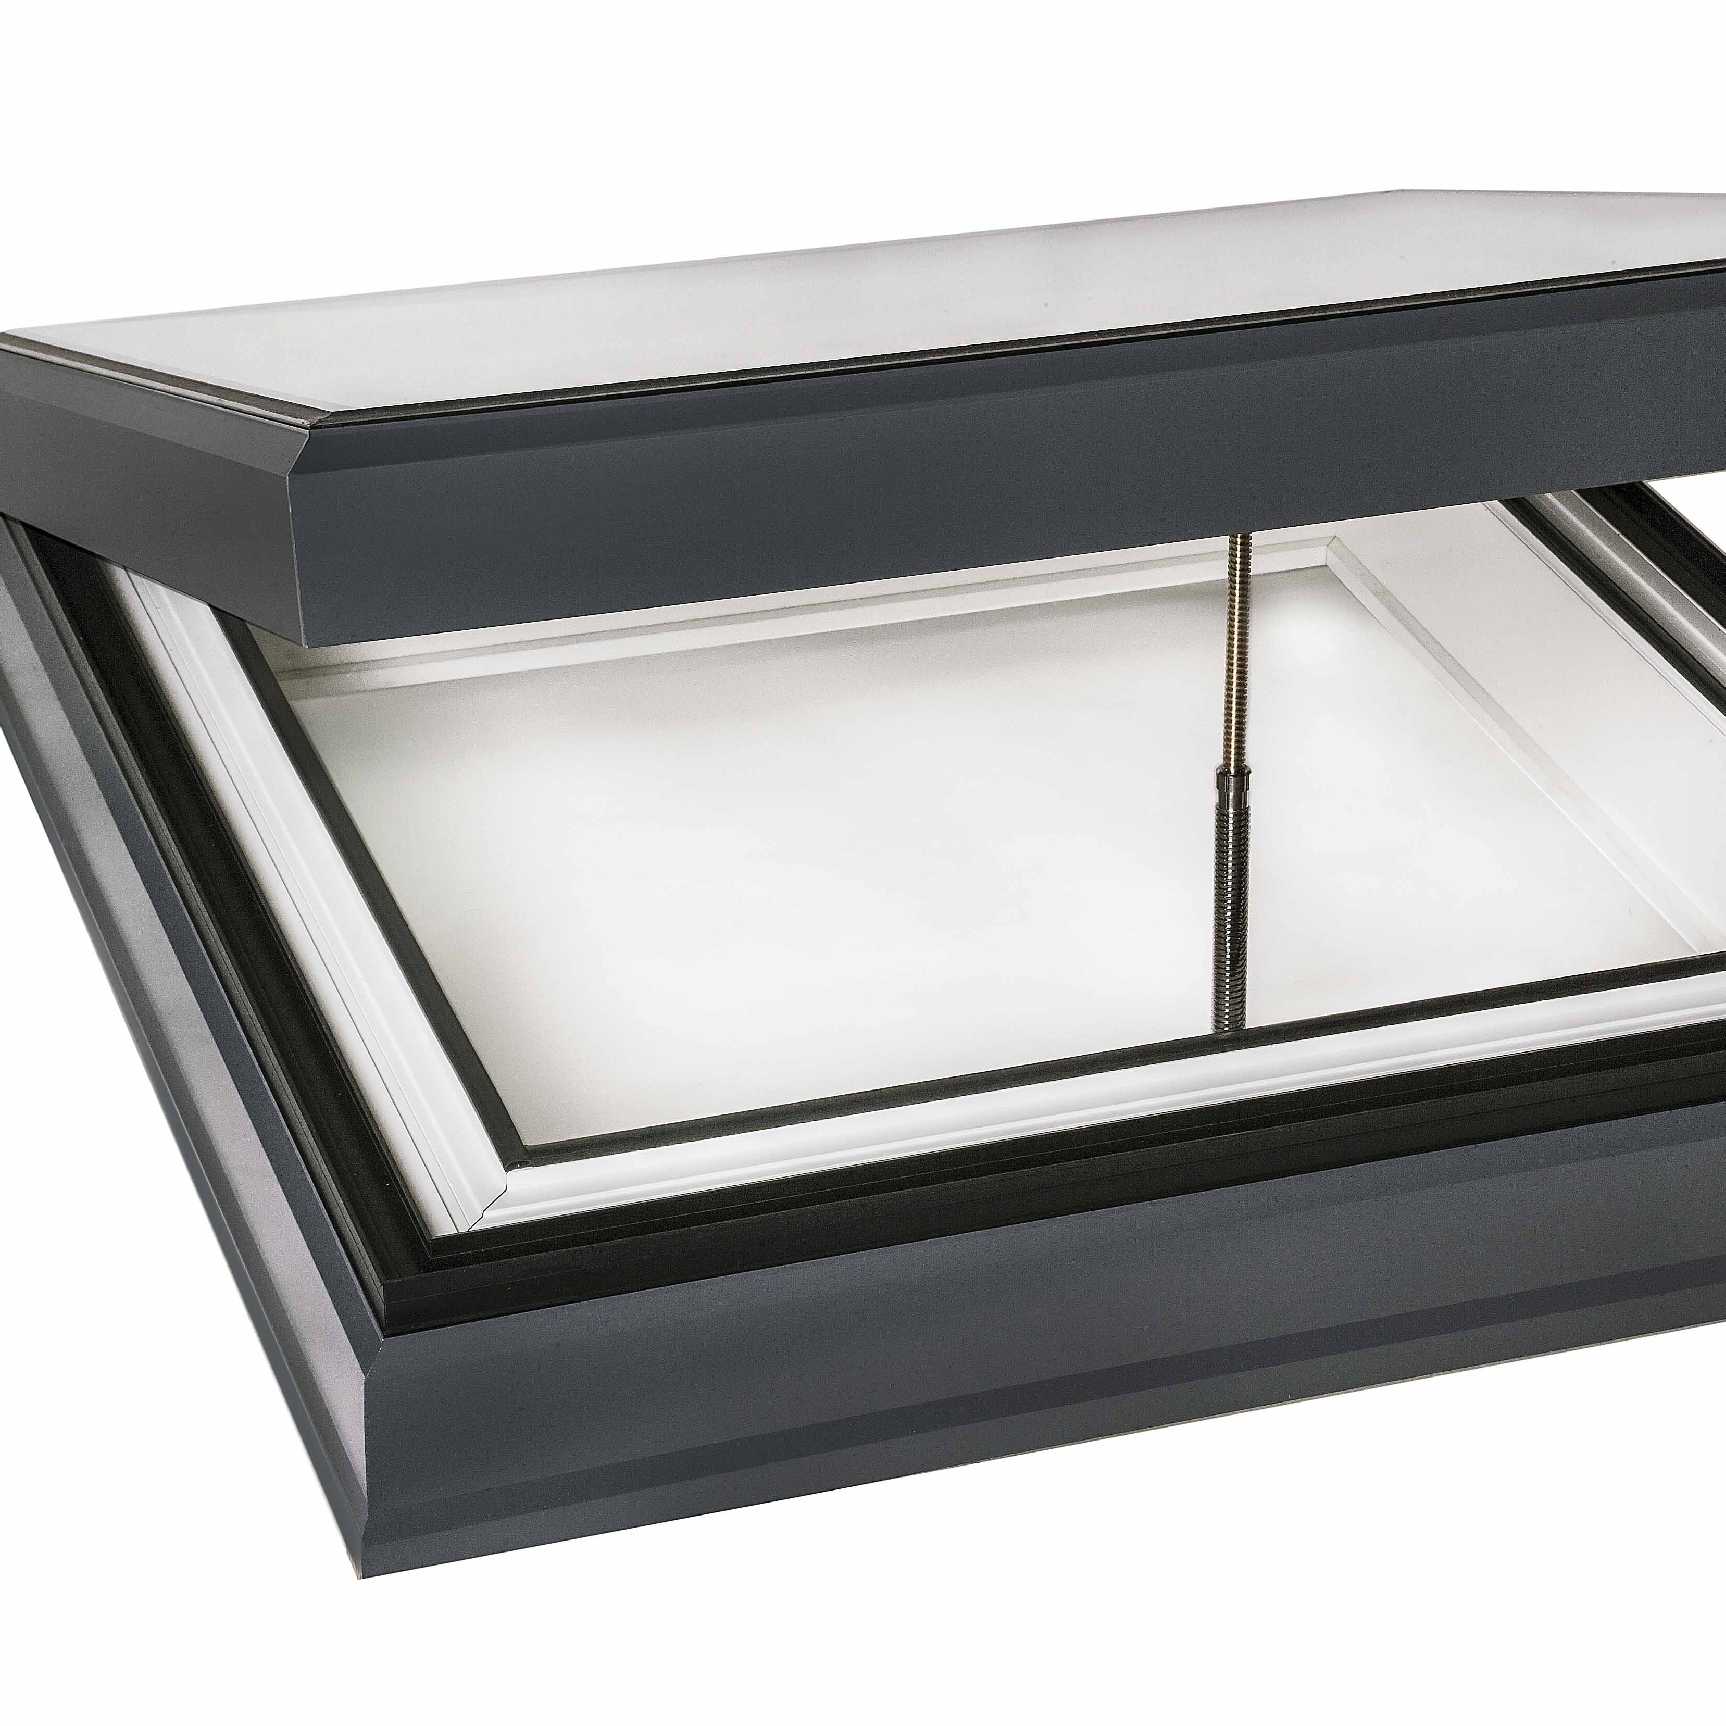 Great deals on EcoGard Flat Roof light, Triple Glazed, Electric Opening, 1,000mm x 1,500mm